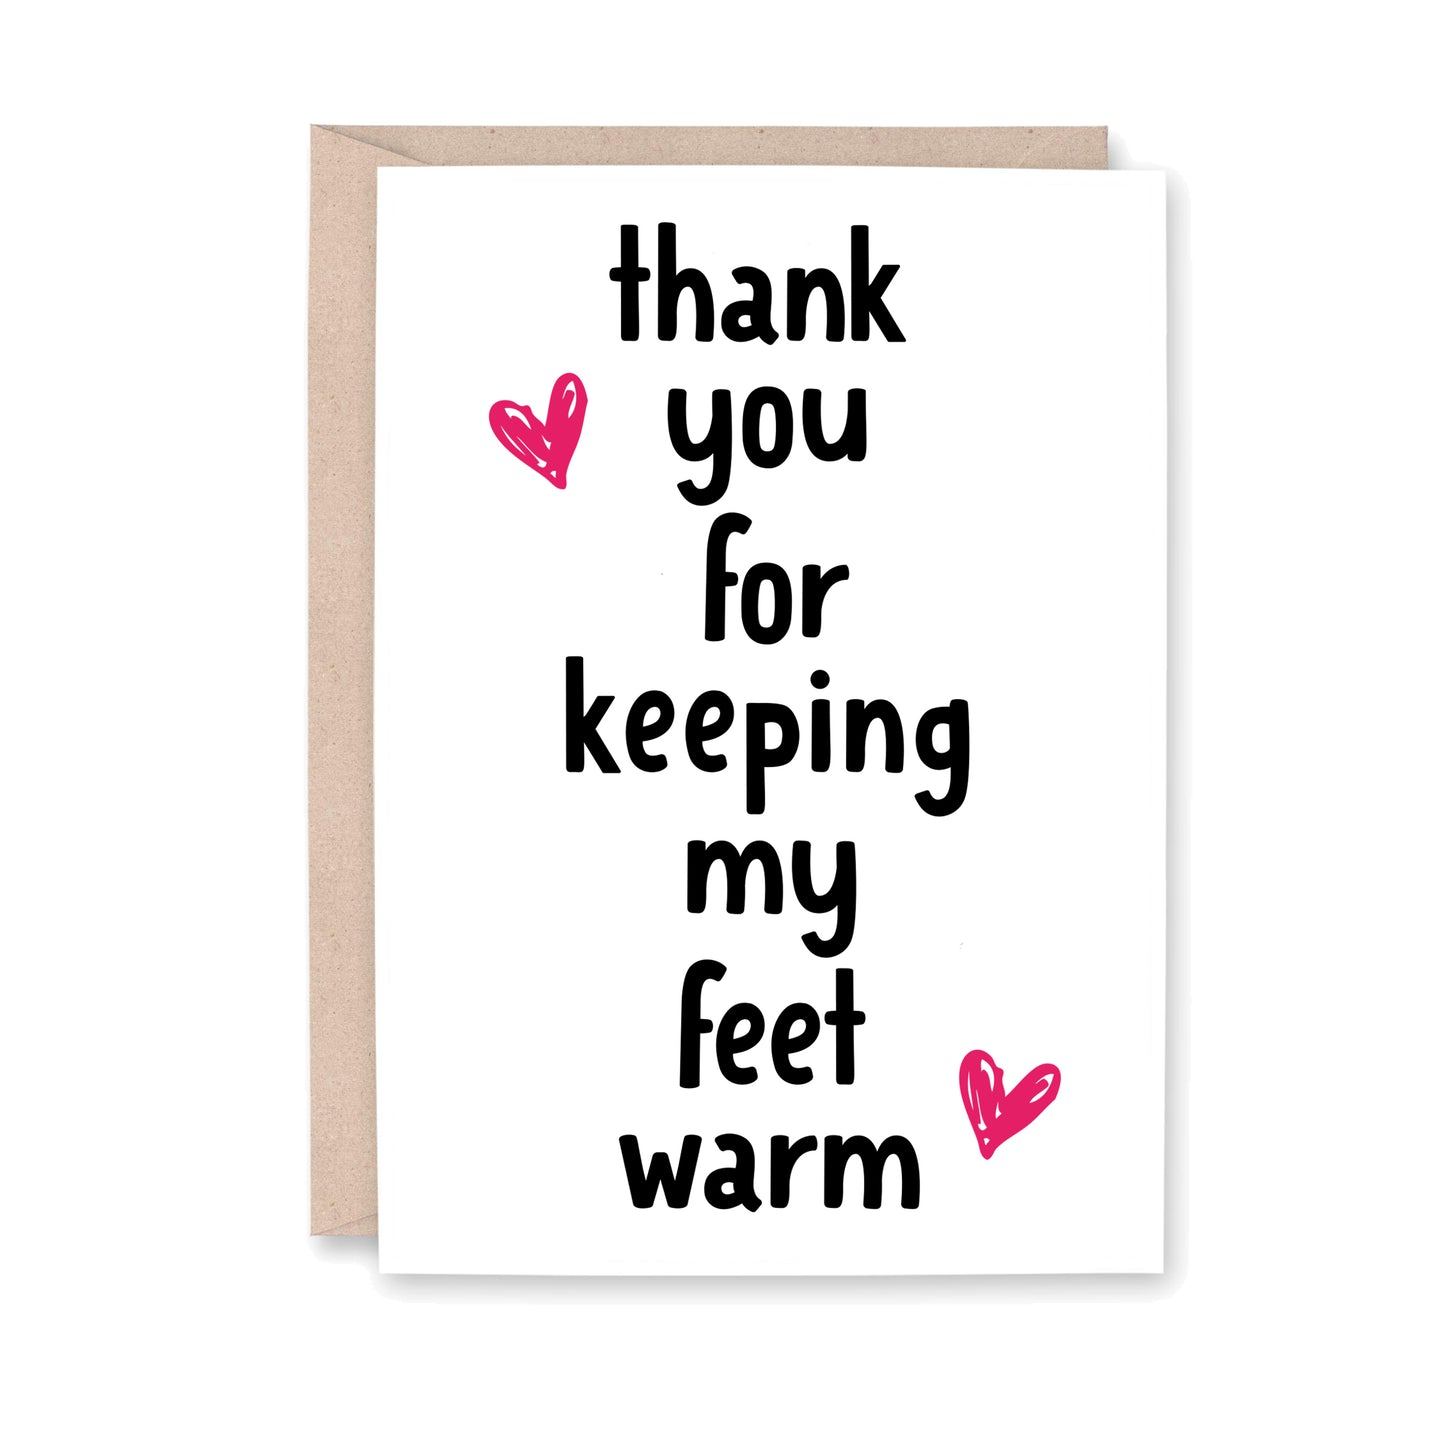 Greeting card that reads "thank you for keeping my feet warm"